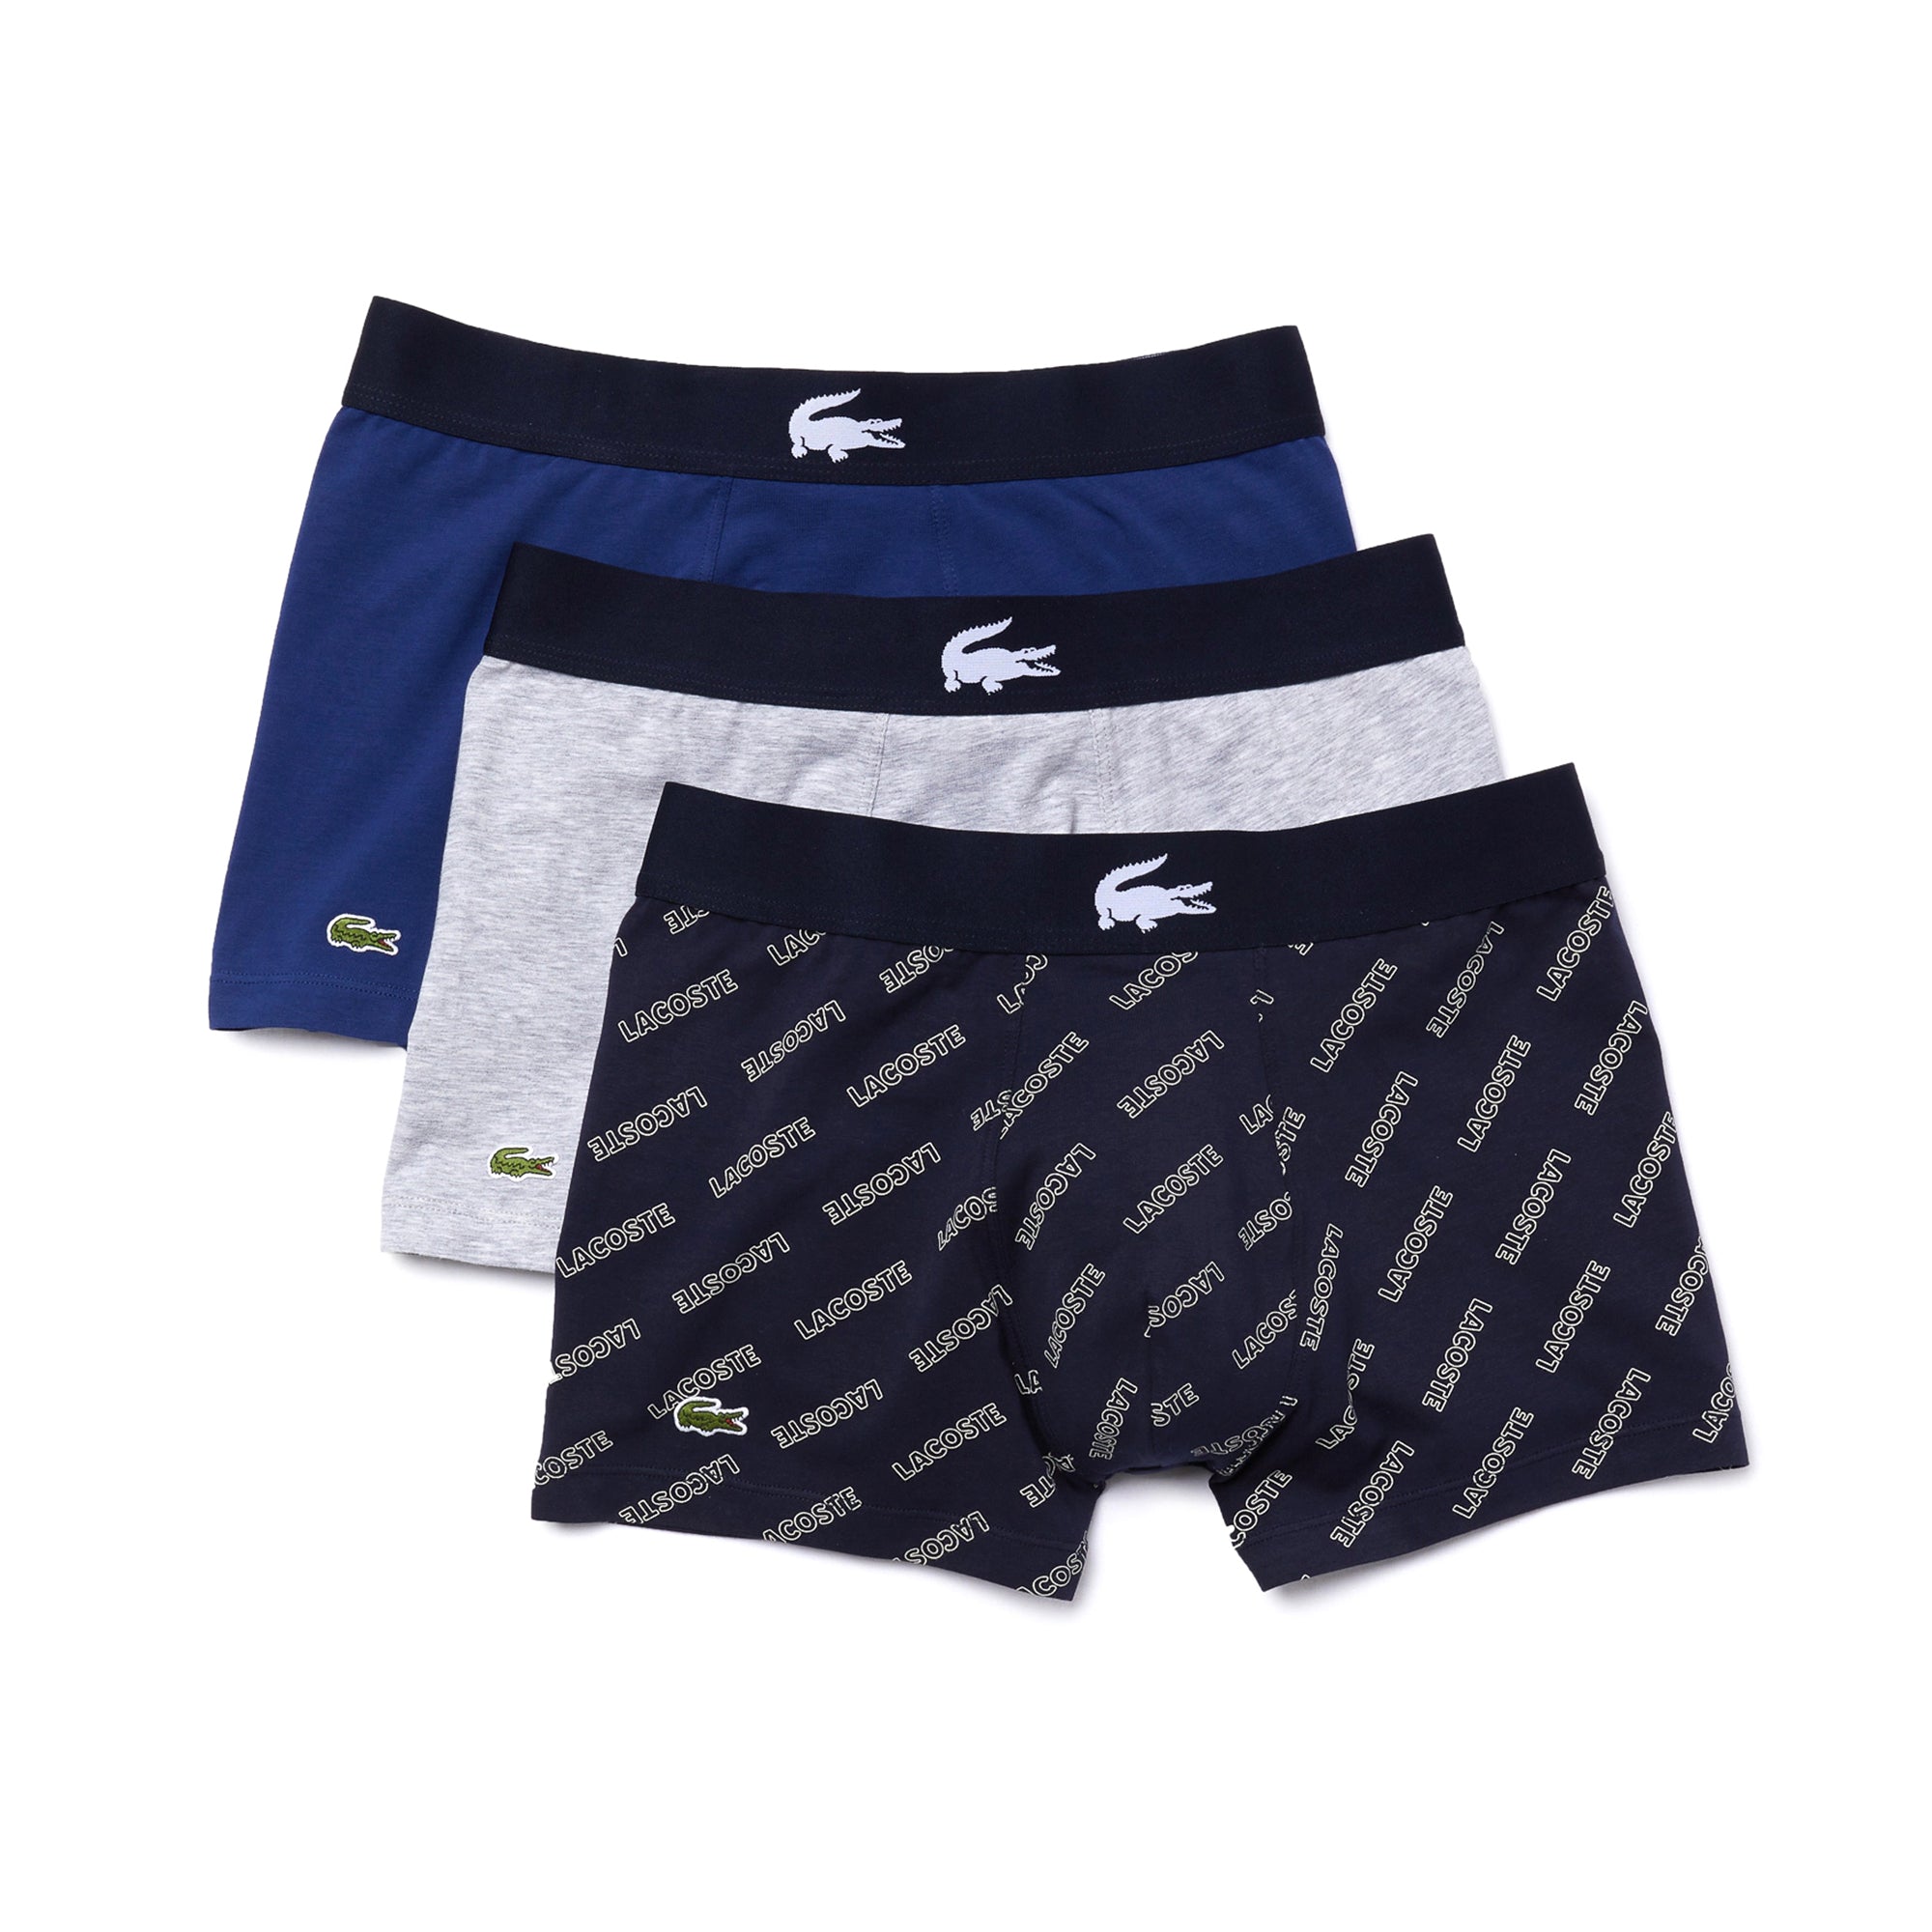 lacoste-cotton-stretch-trunk-3-pack-5h1774-navy-grey-chine-white-bck